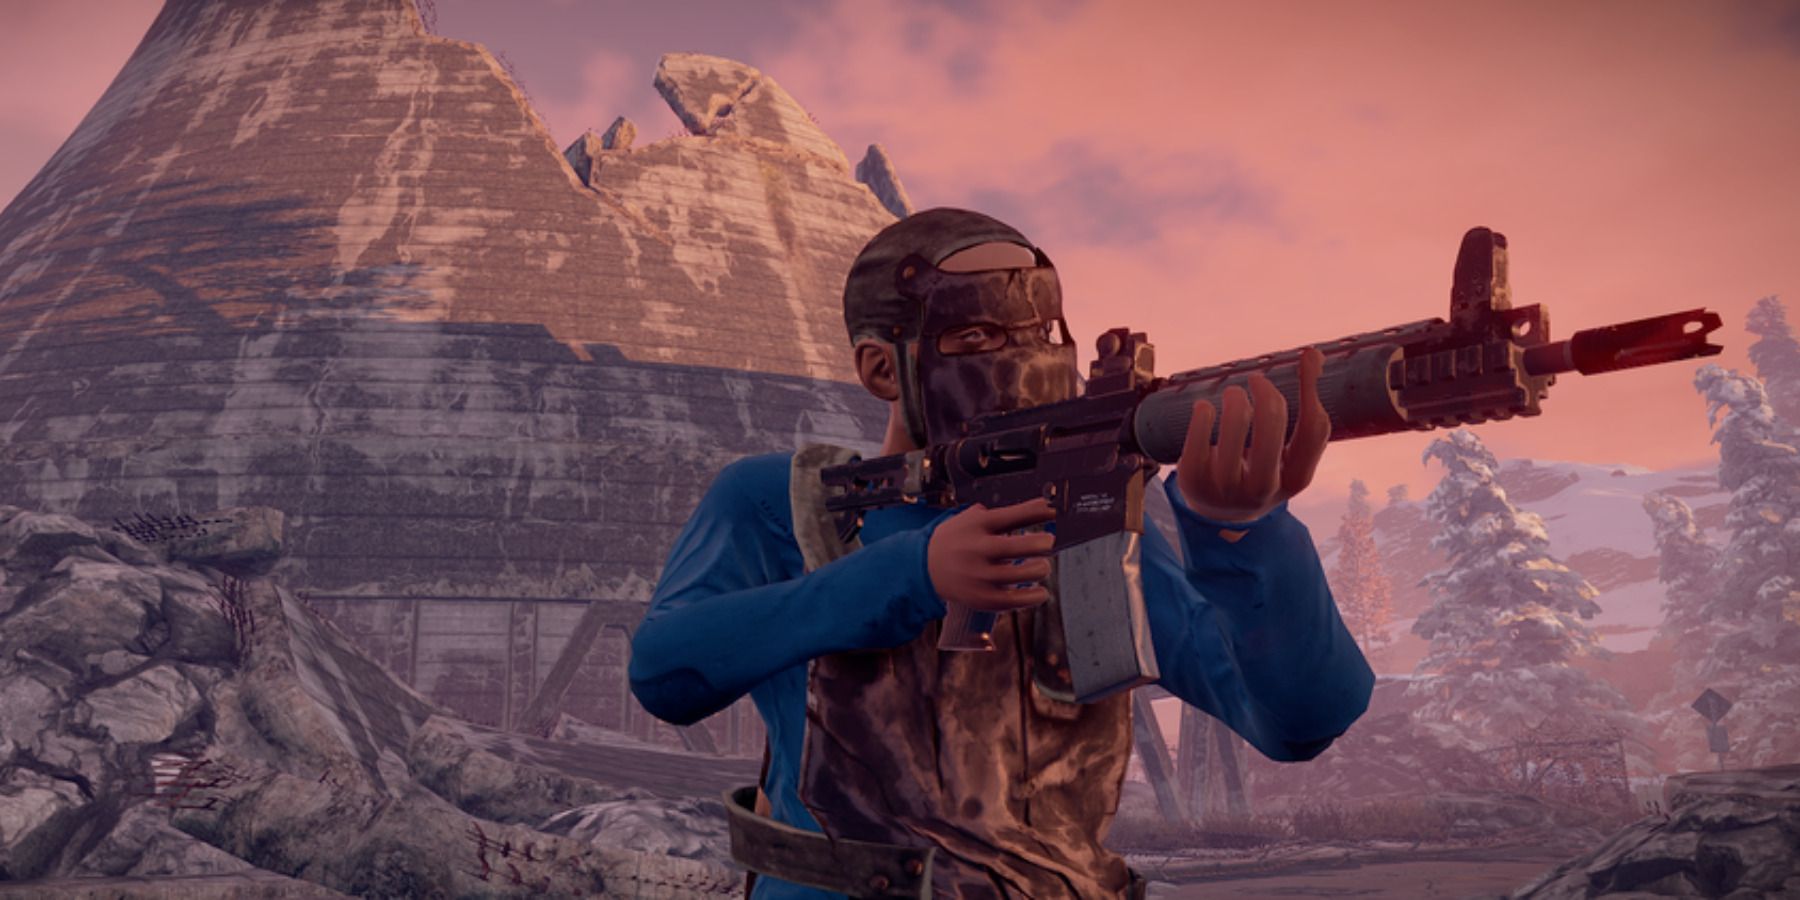 Player using the Metal Armor in Rust.